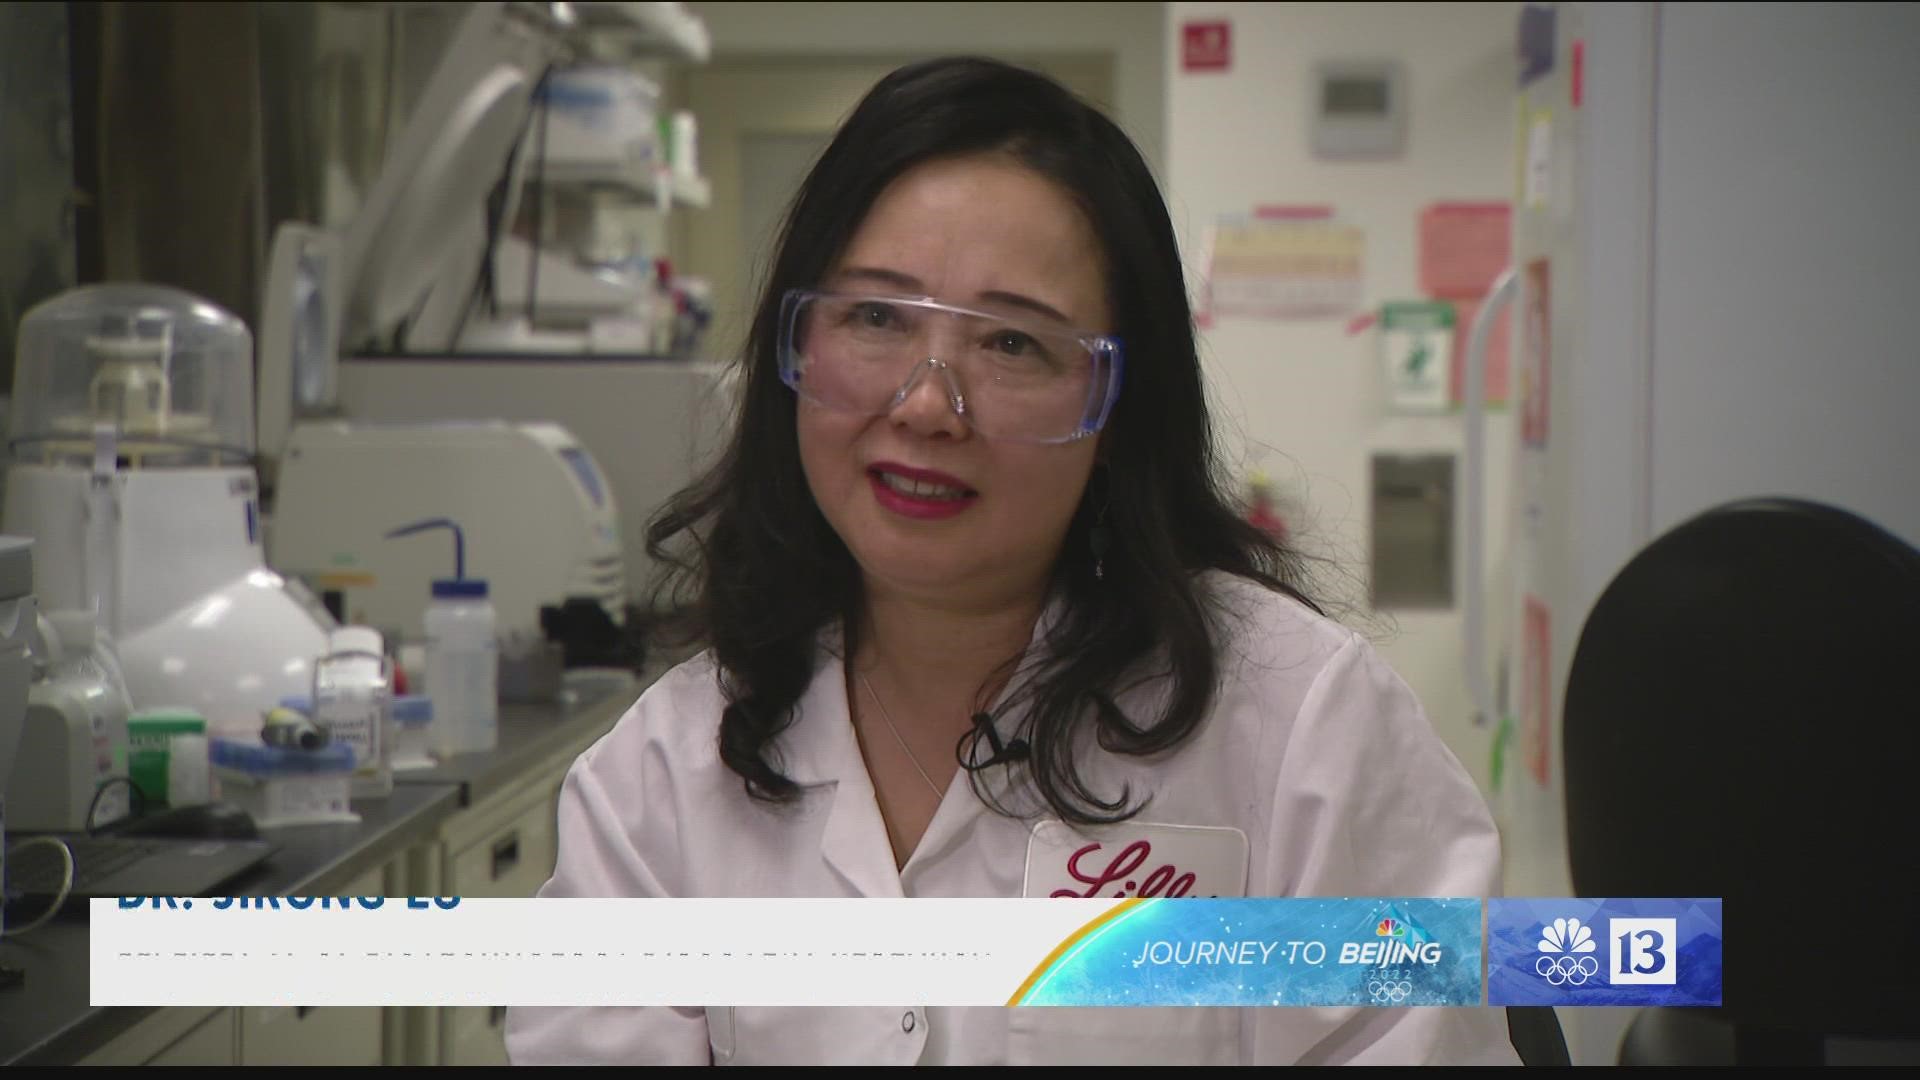 Jirong Lu oversees a lab where she and her team discover new medicine in many therapeutic areas, like Alzheimer's.